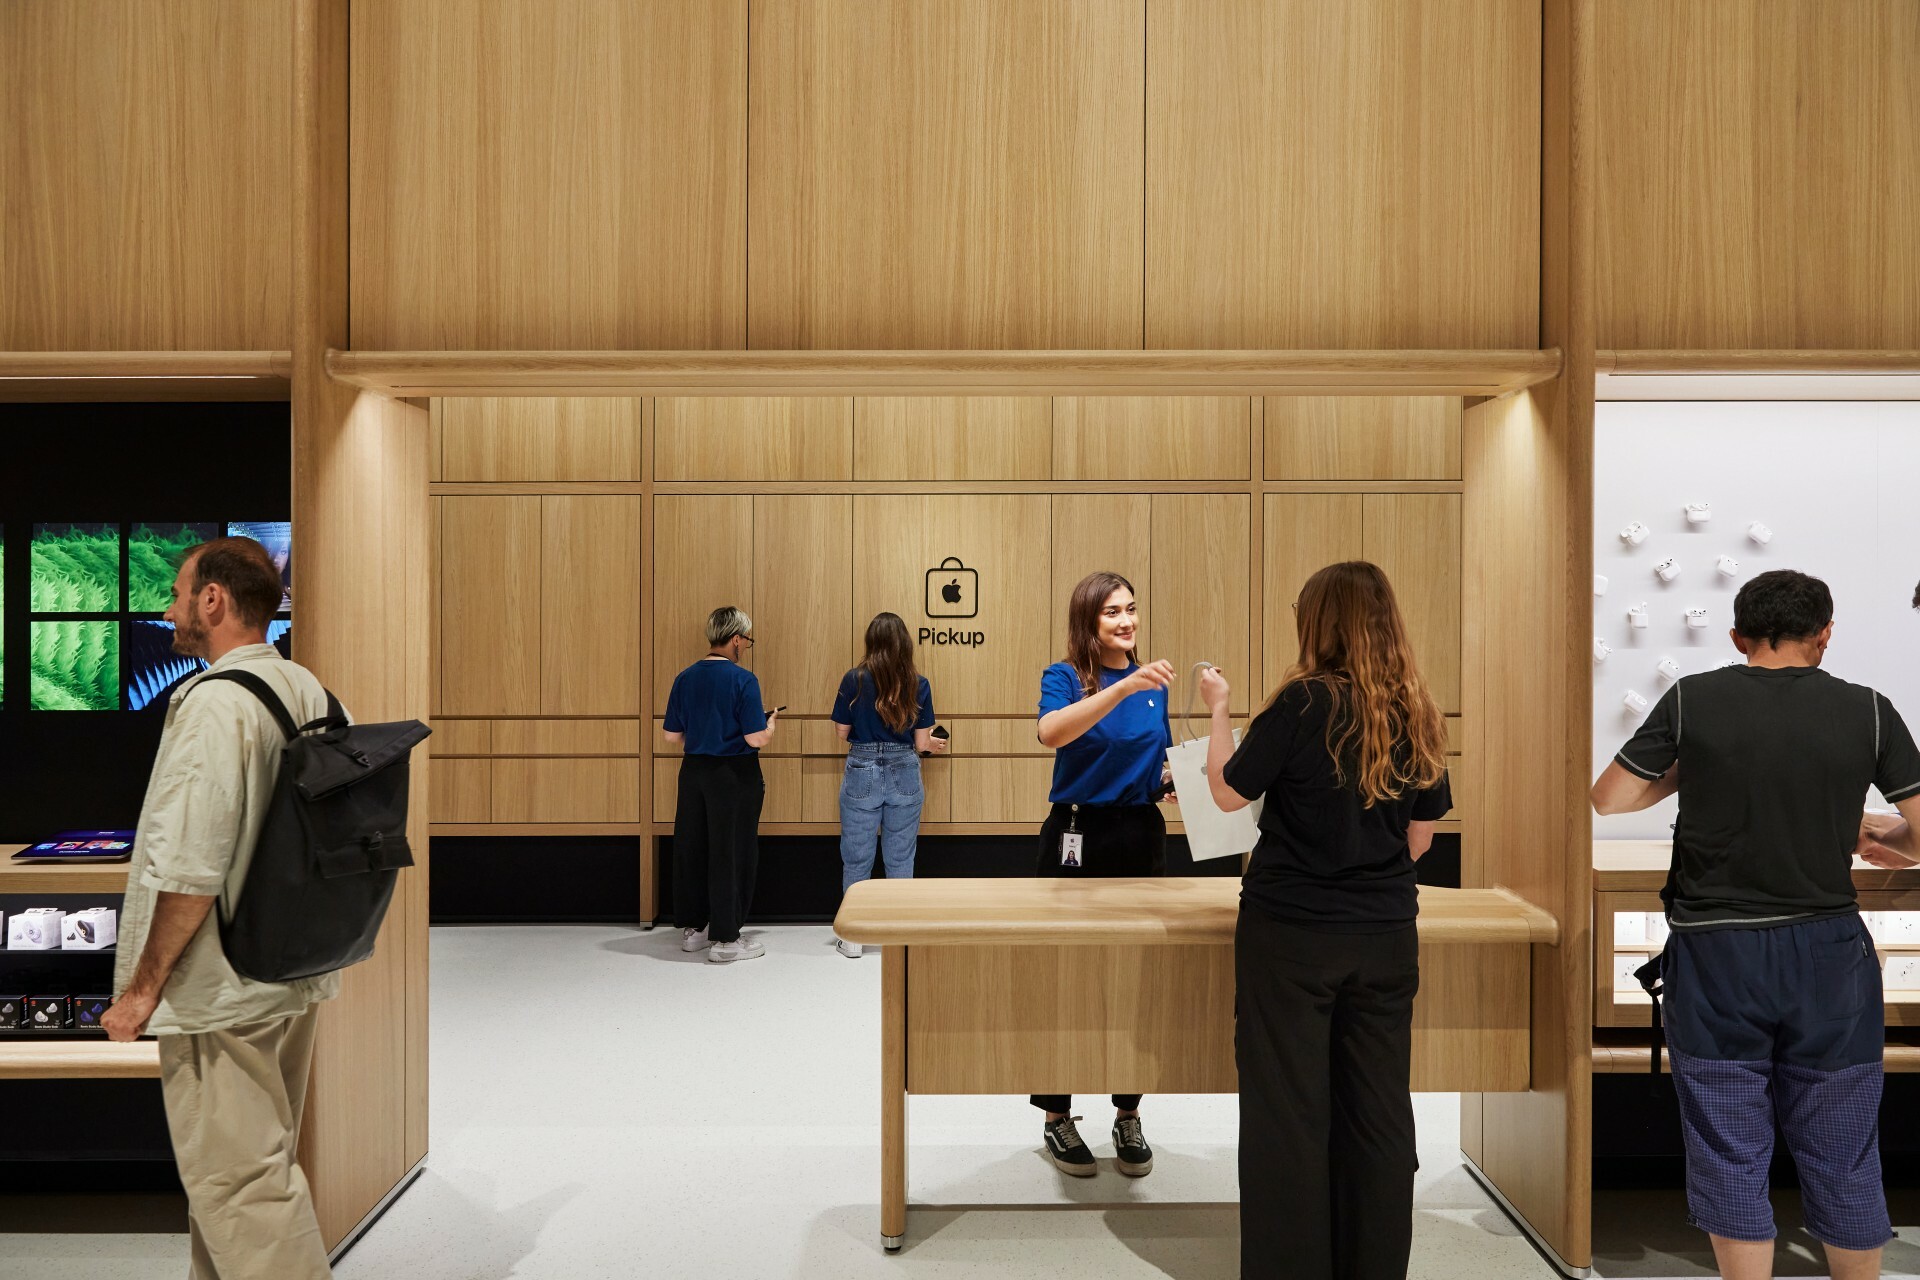 a-snazzy-new-apple-store-has-opened-in-battersea-power-station